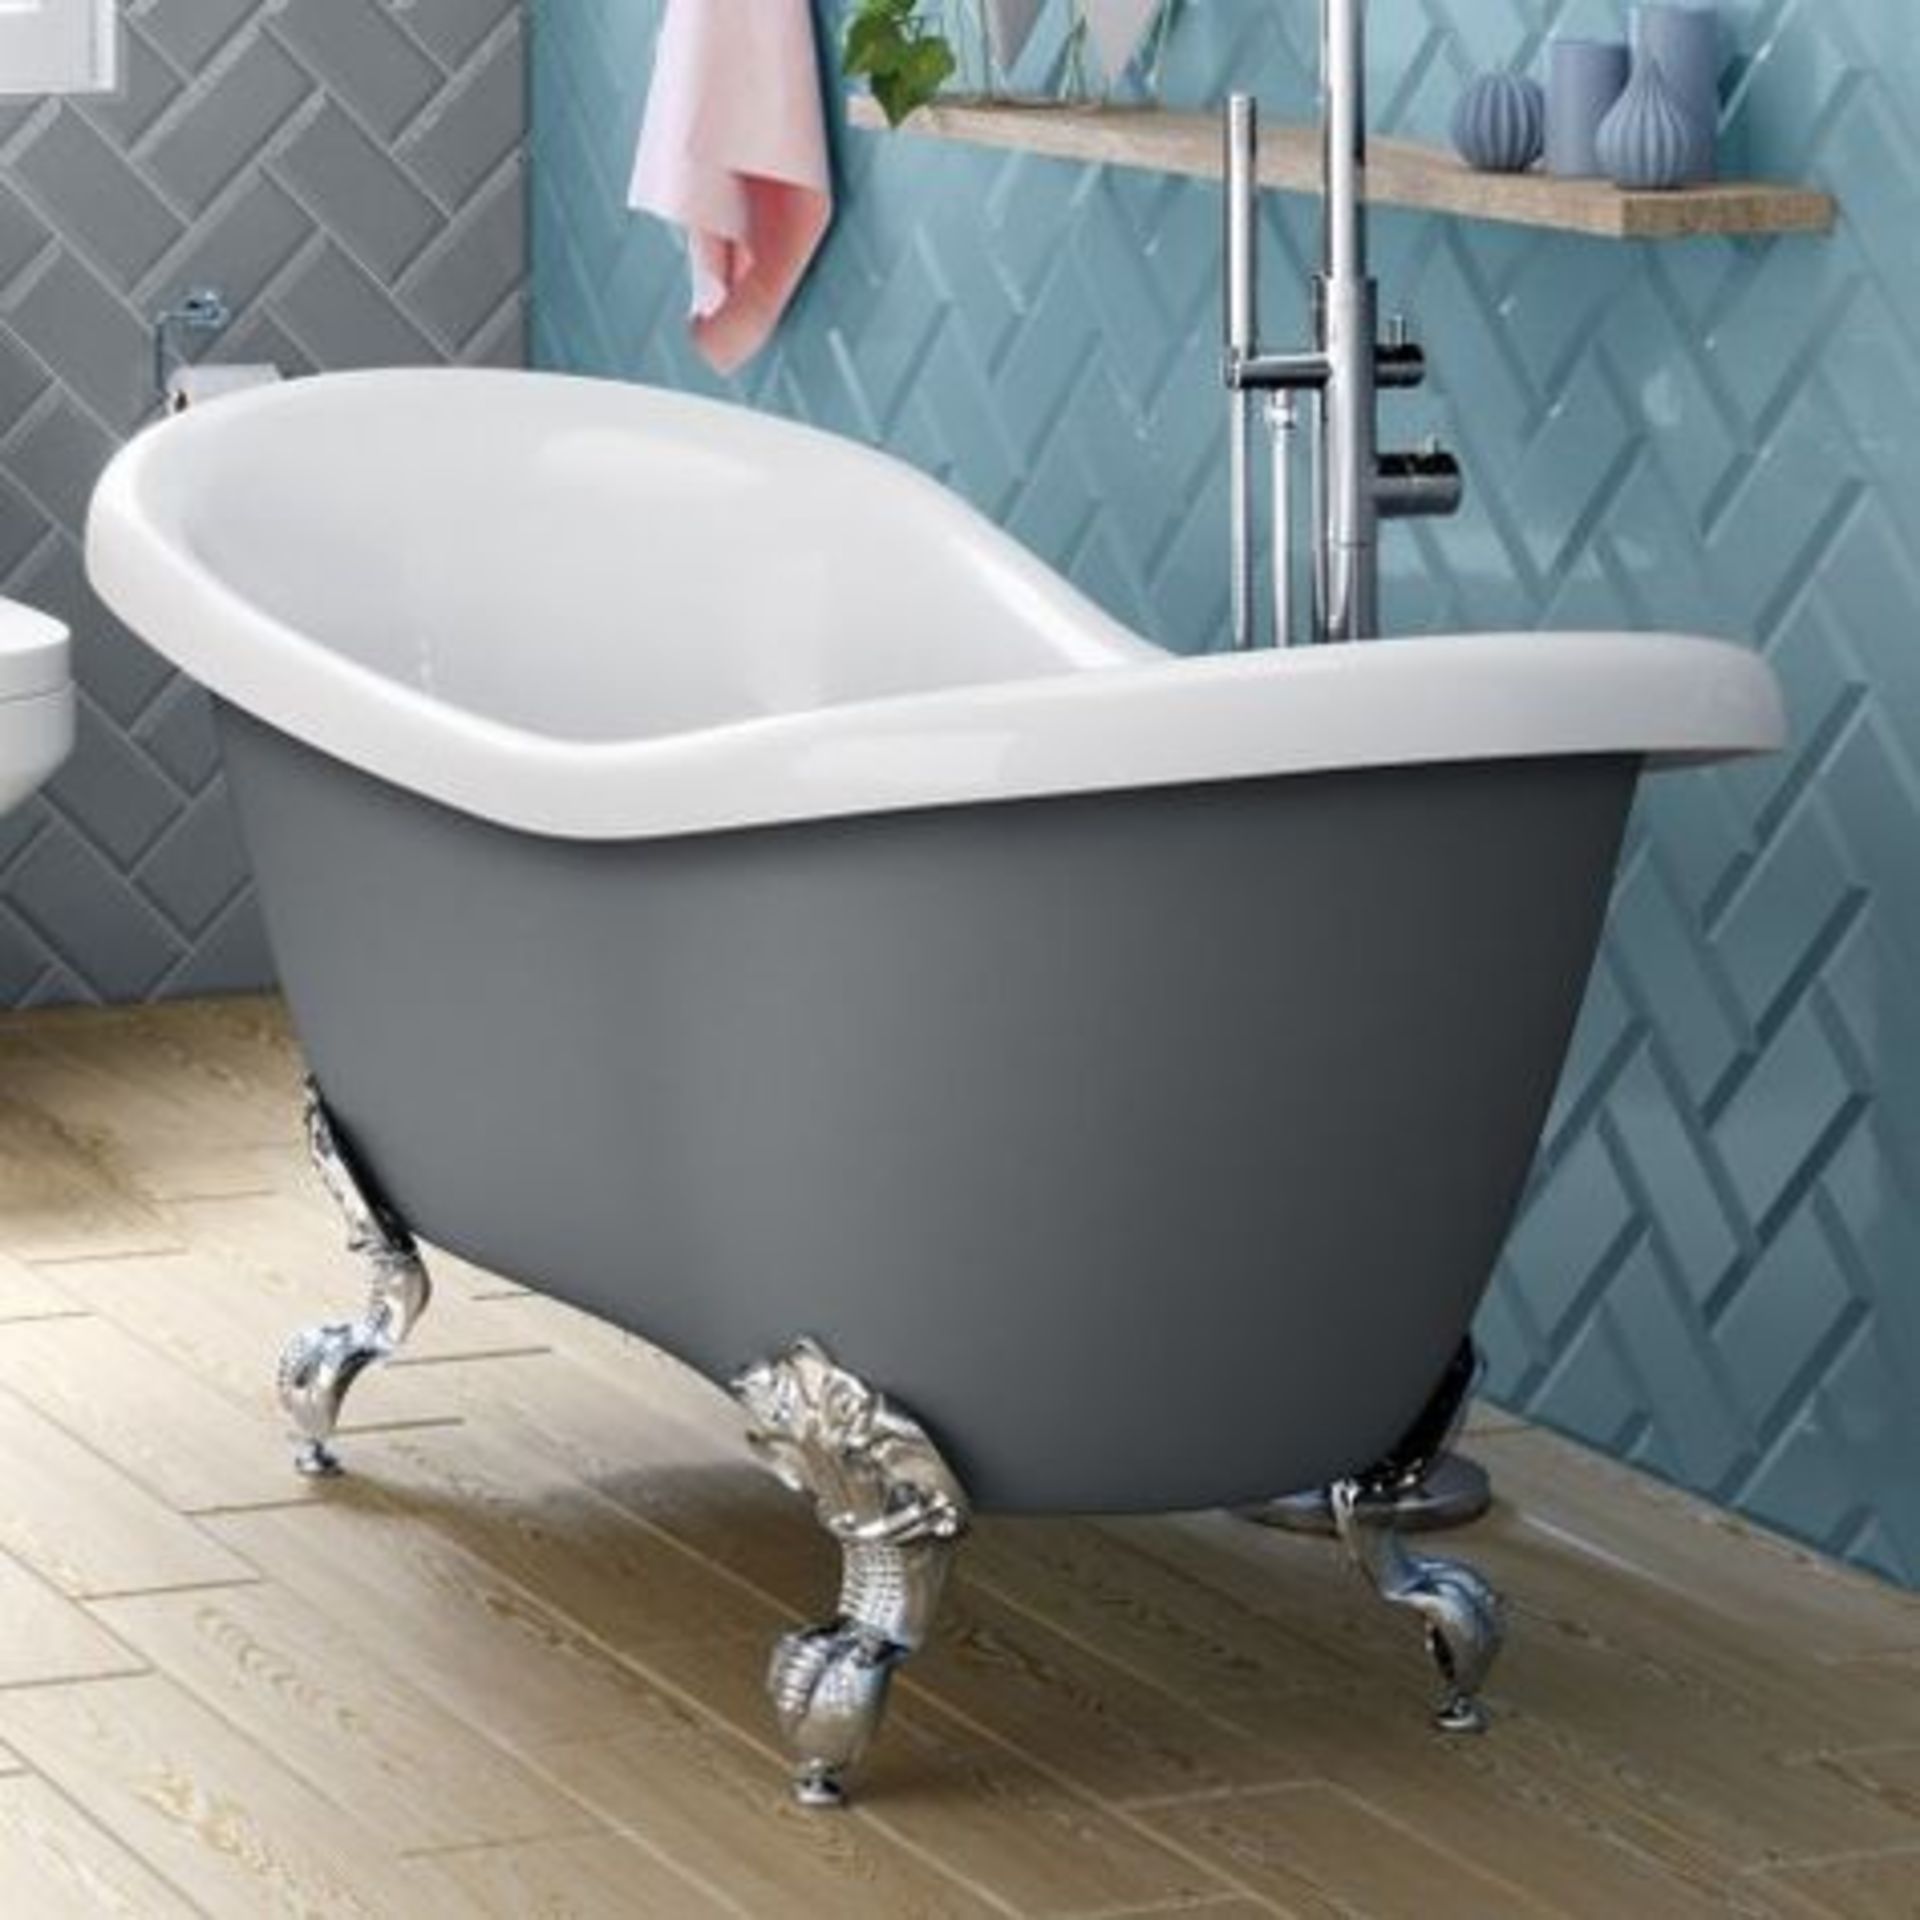 (AL40) 1700mm Storm Limited Edition Roller Top Freestanding Bath. Storm Limited Edition showcases